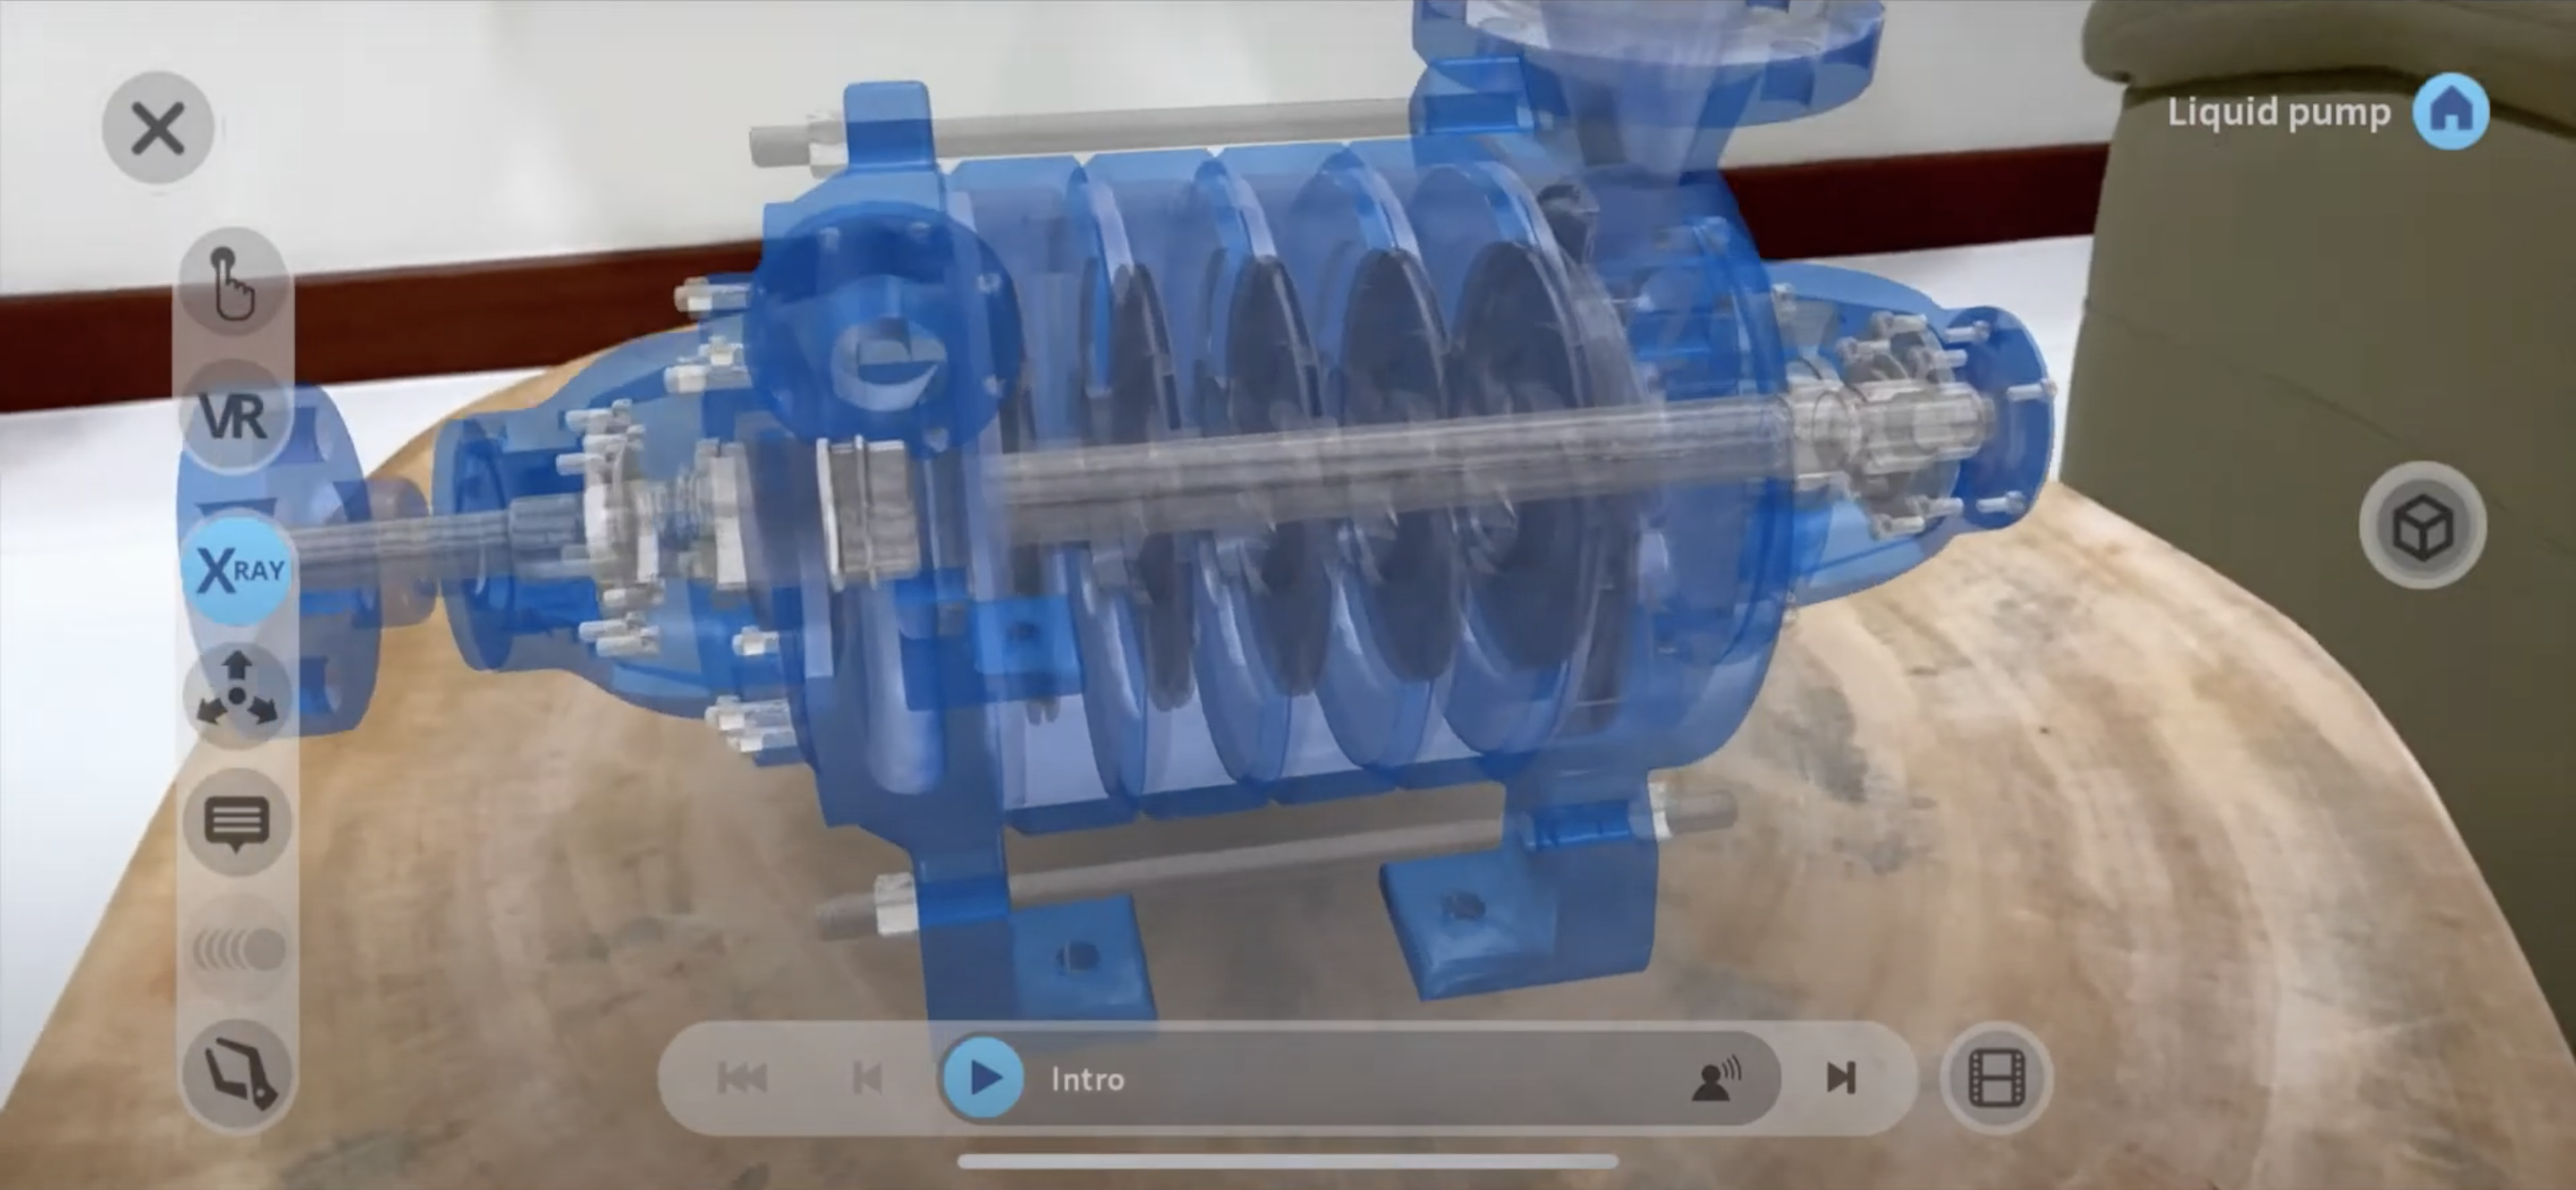 Understanding the Centrifugal Pump in AR and VR